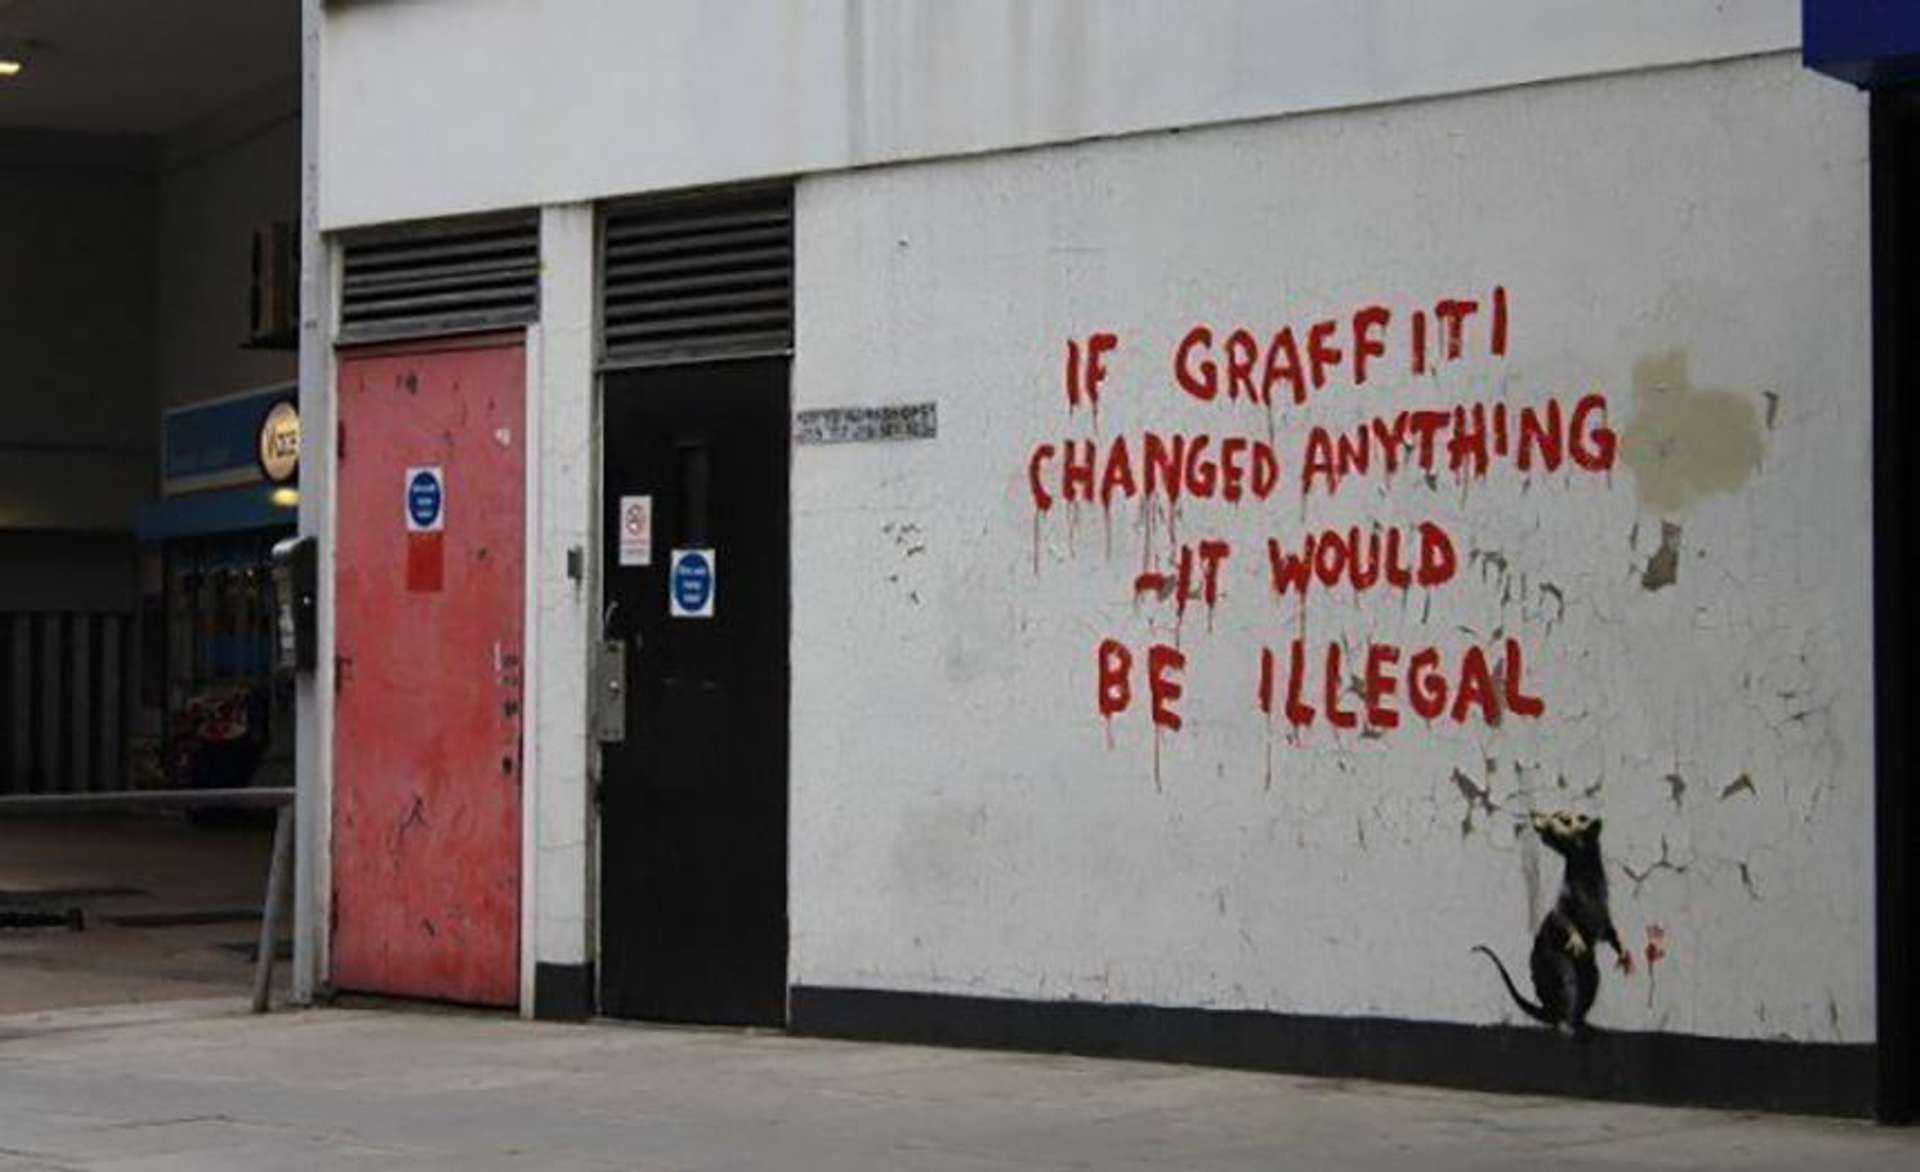 If Graffiti Changed Anything It Would Be Illegal by Banksy - MyArtBroker